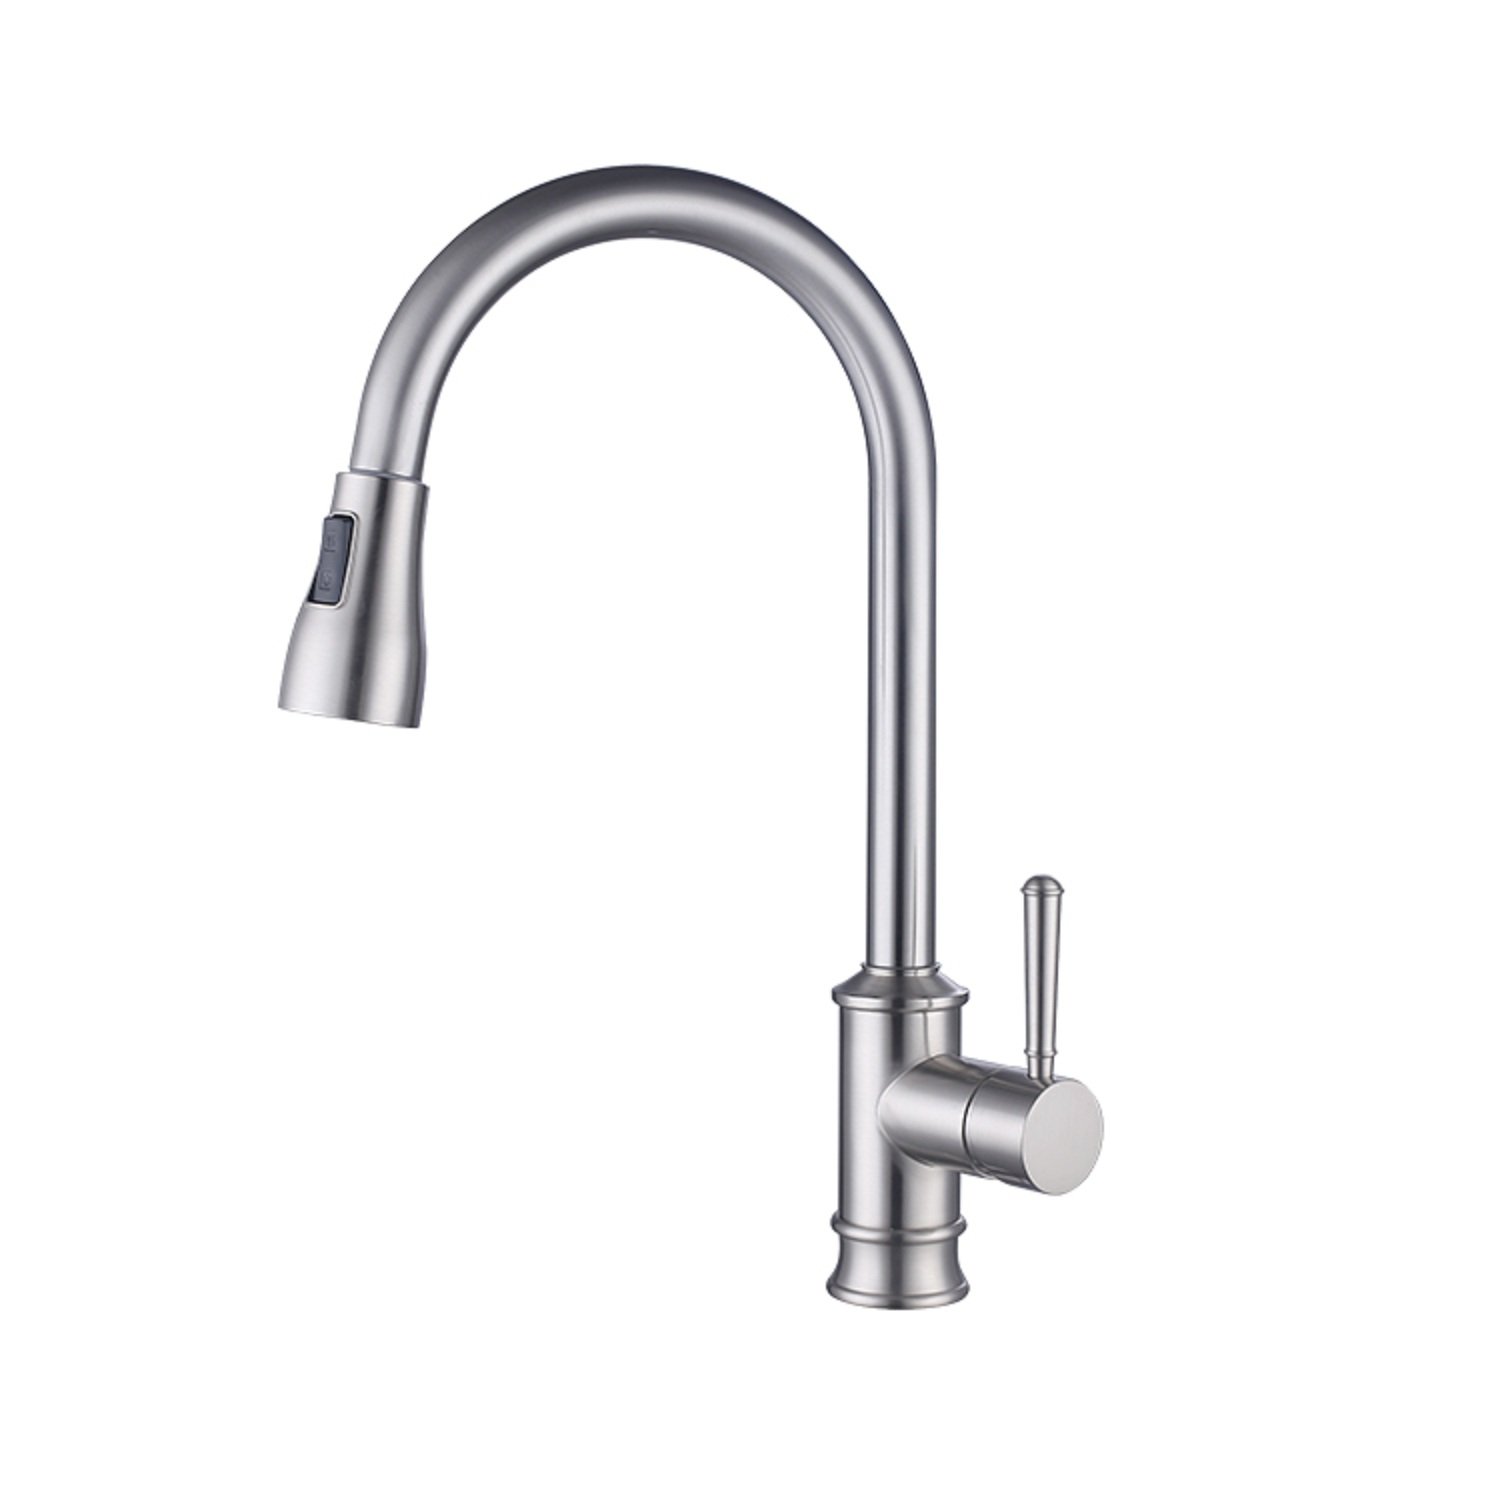 CASAINC Single Handle High Arc Pull out Kitchen Faucet in Brushed Nickel-CASAINC